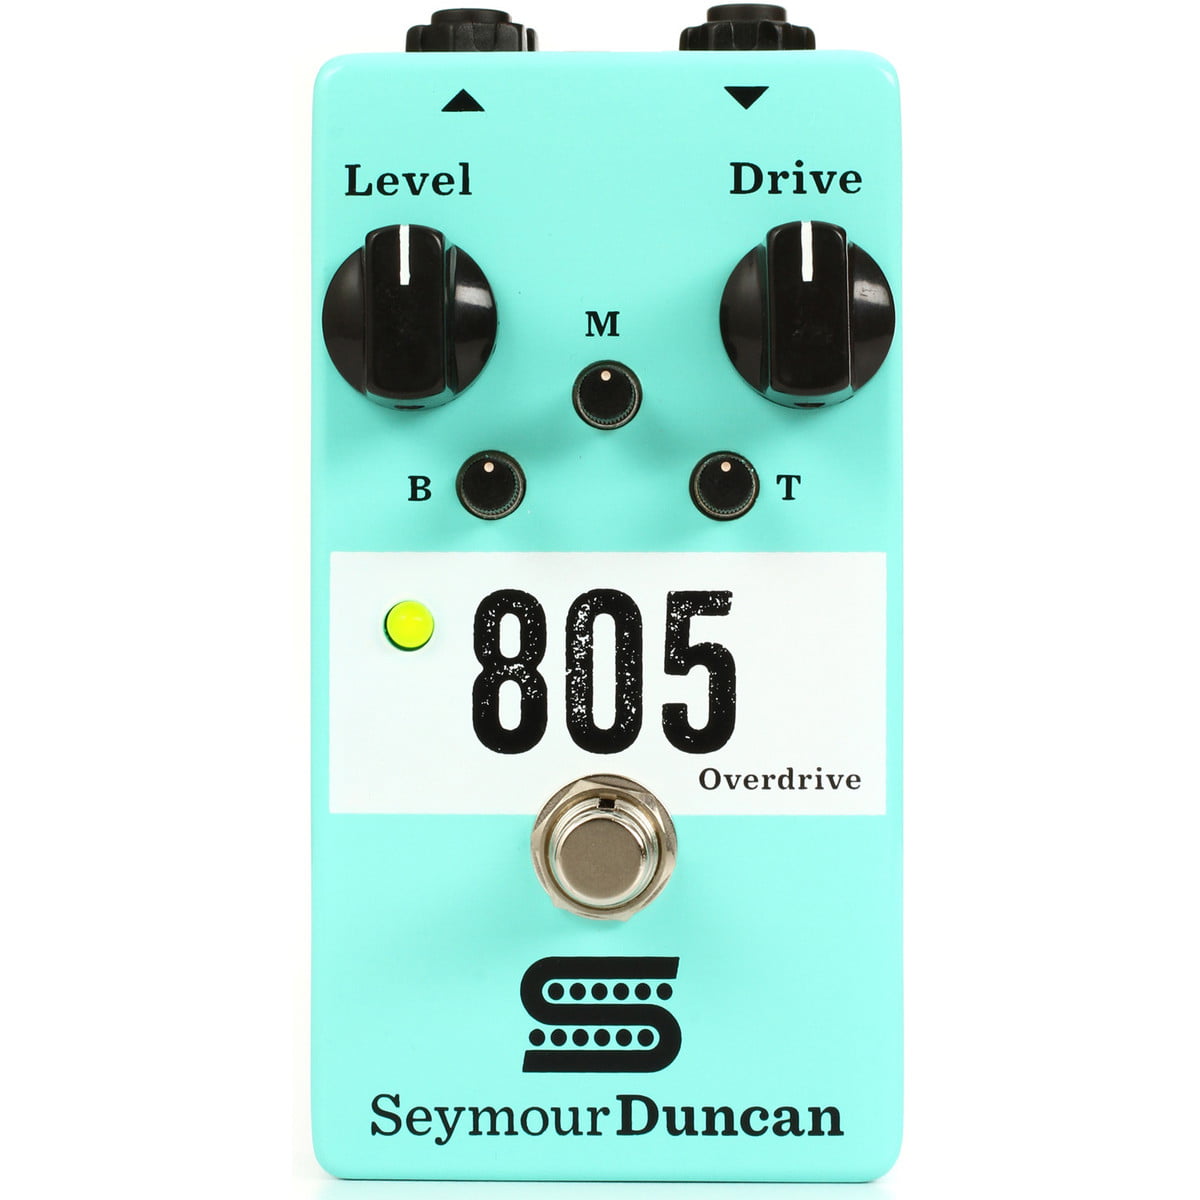 Seymour Duncan 805 Overdrive Pedal - New Seymour Duncan              EQ Boost Overdrive   Guitar Effect Pedal